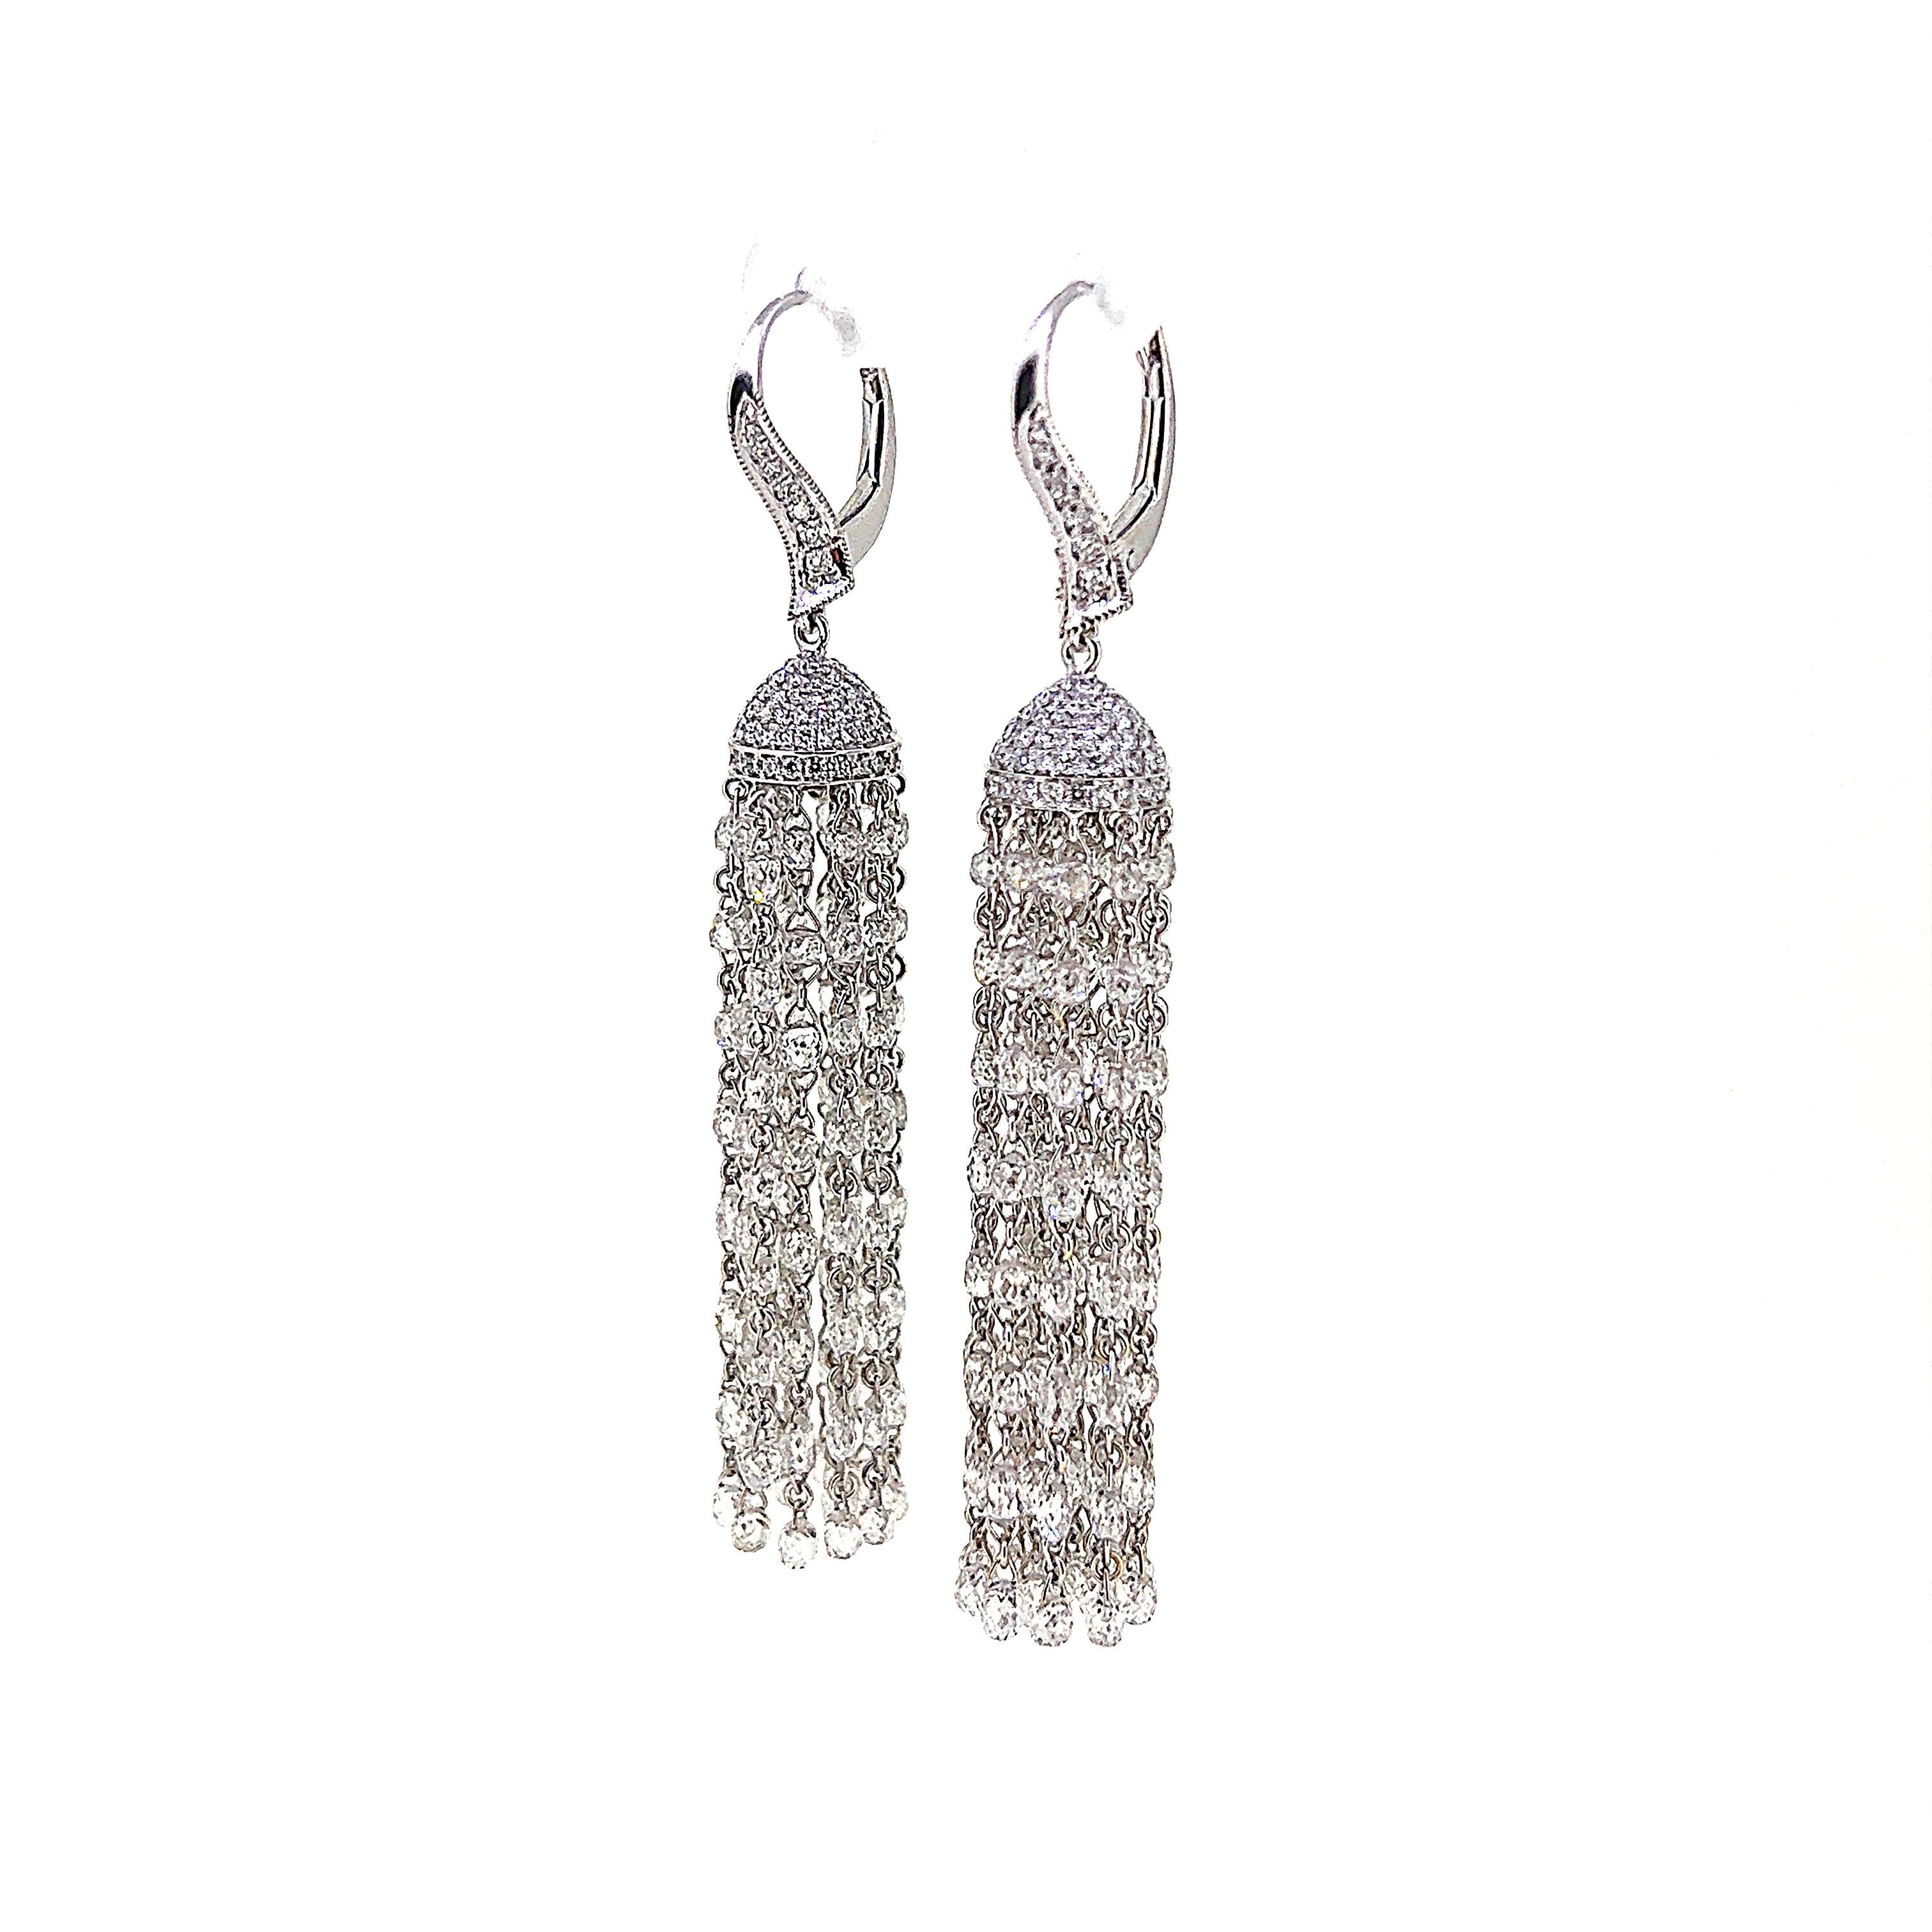 This is a stunning 1920 inspired Tassel Earrings weighing 22.37 carats in total.  This remarkable piece features 450 pieces of Briolette cut and Round Brilliant cut diamonds set on 18 Karat White Gold.  Extremely stylish and elegant is what set this